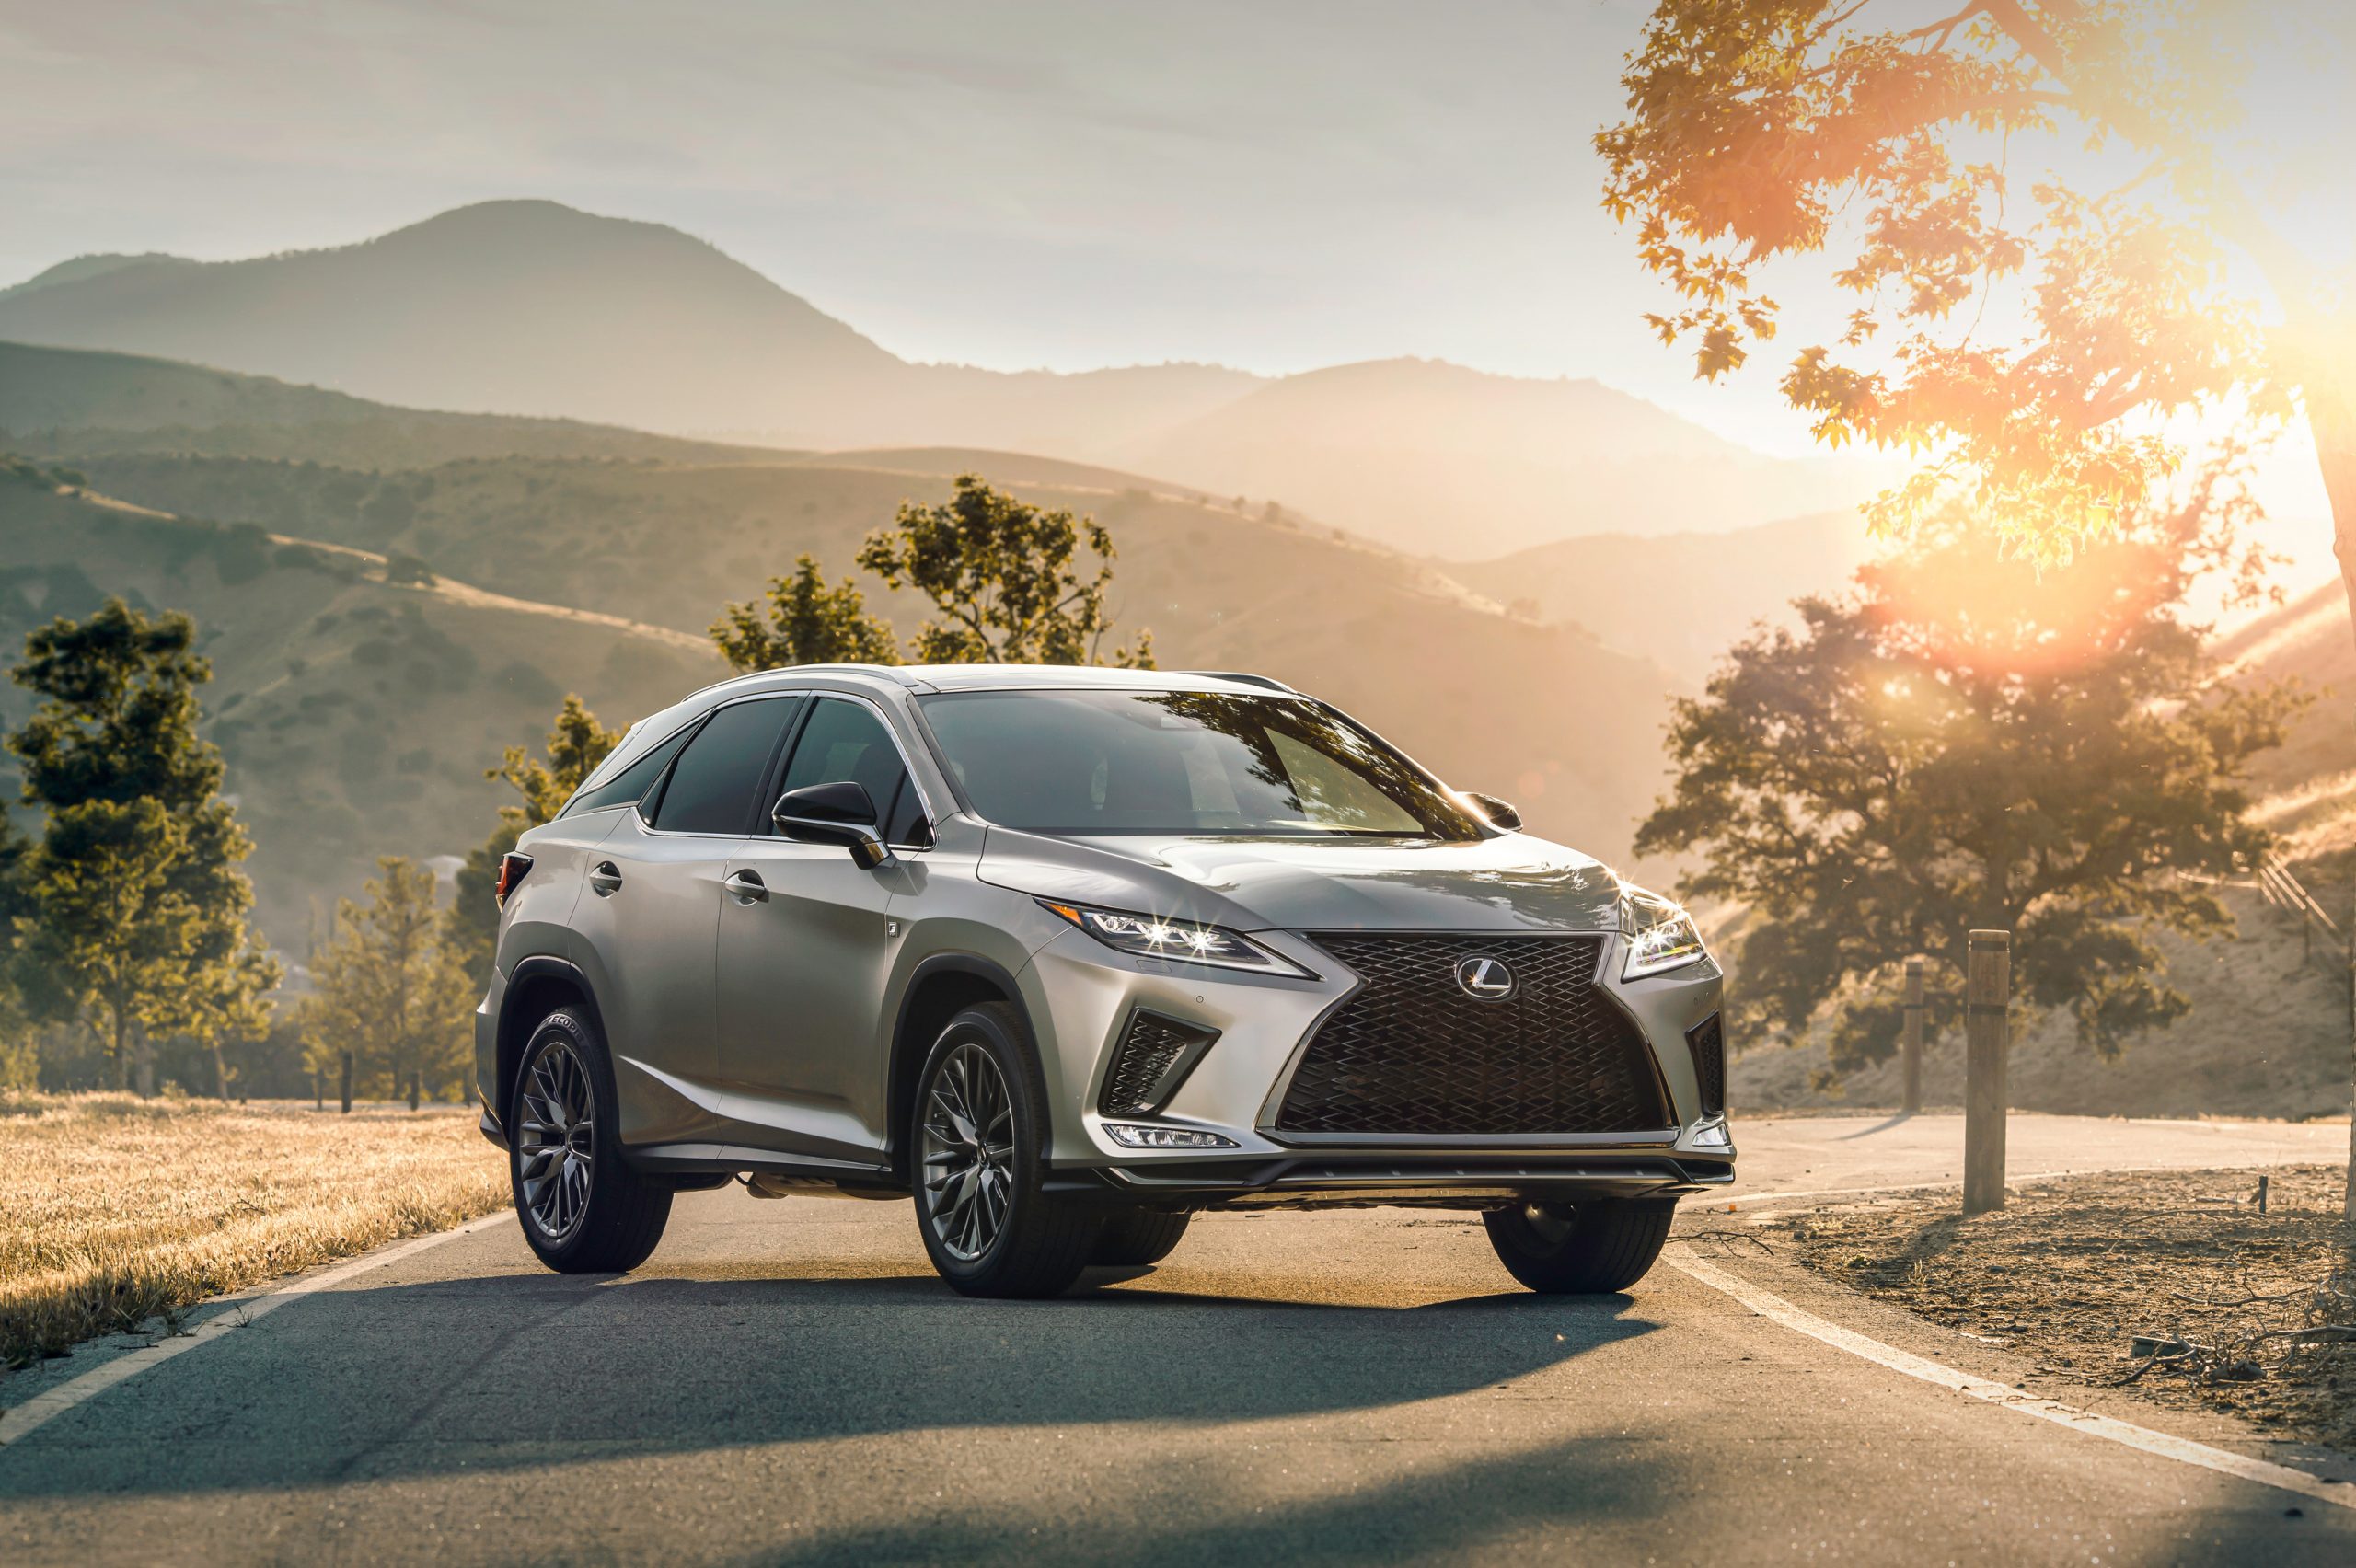 New 2022 Lexus Rx 350 New Colors, Owners Manual, Out The Door Price